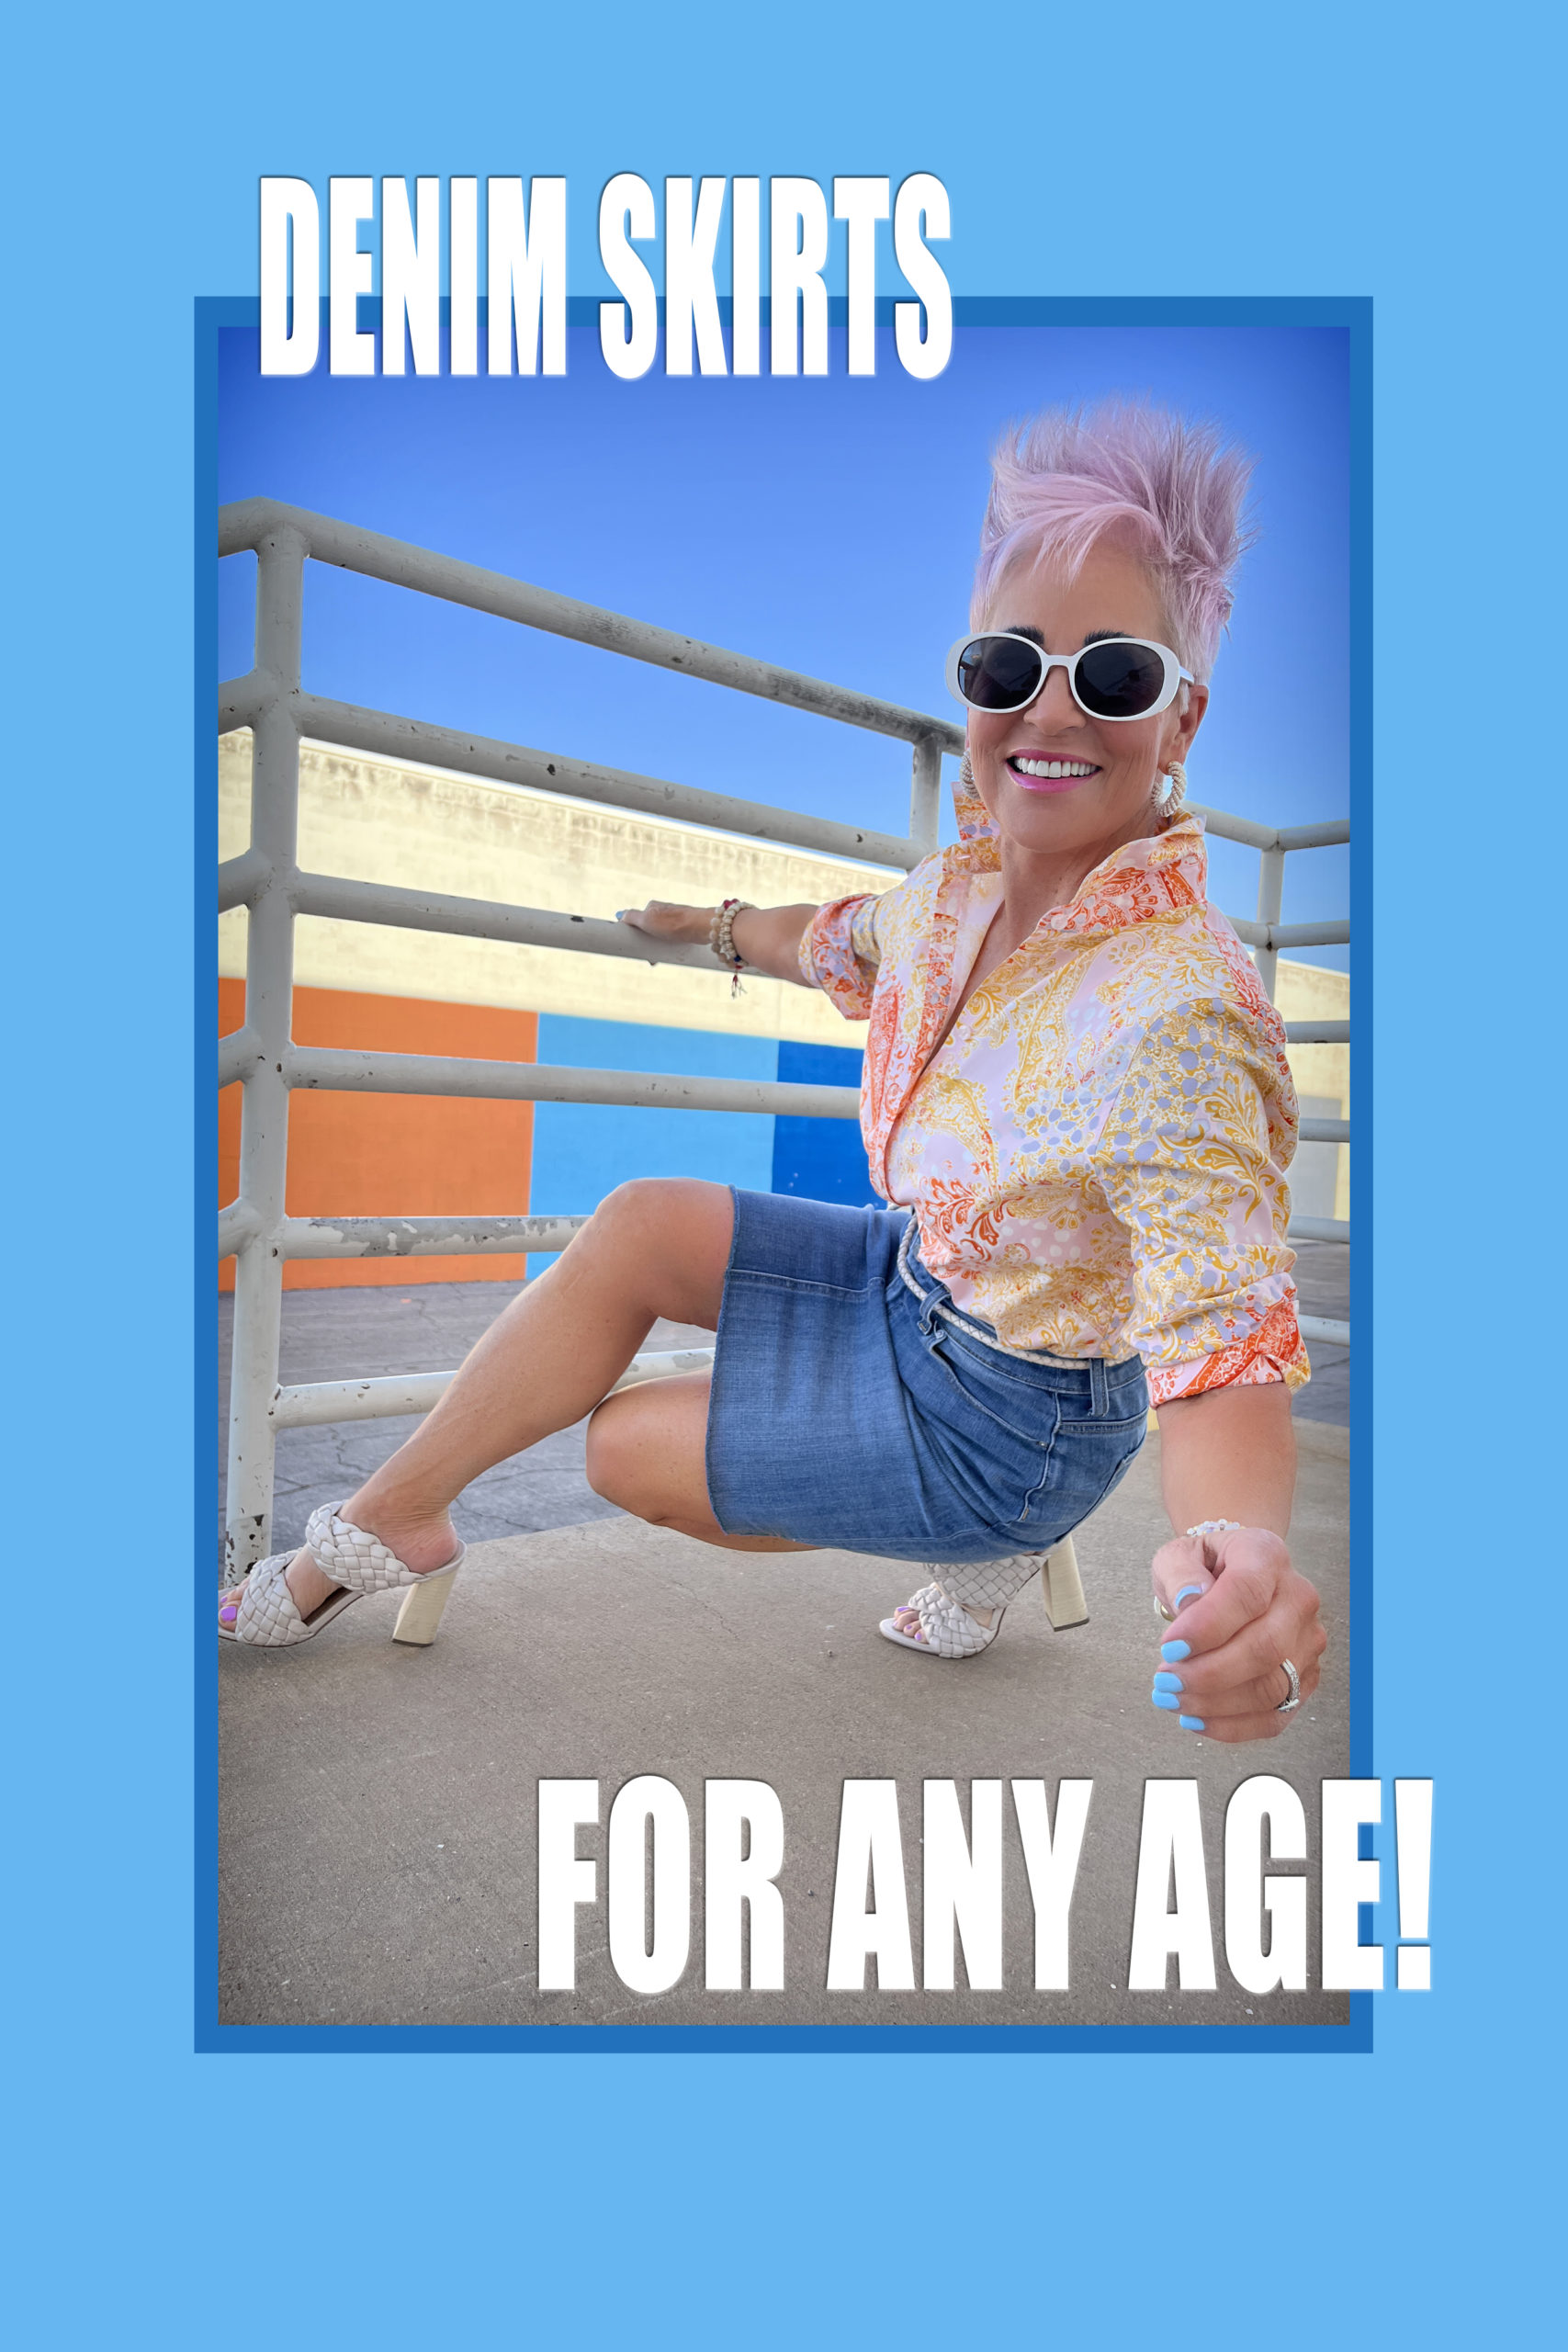 Denim skirts for any age